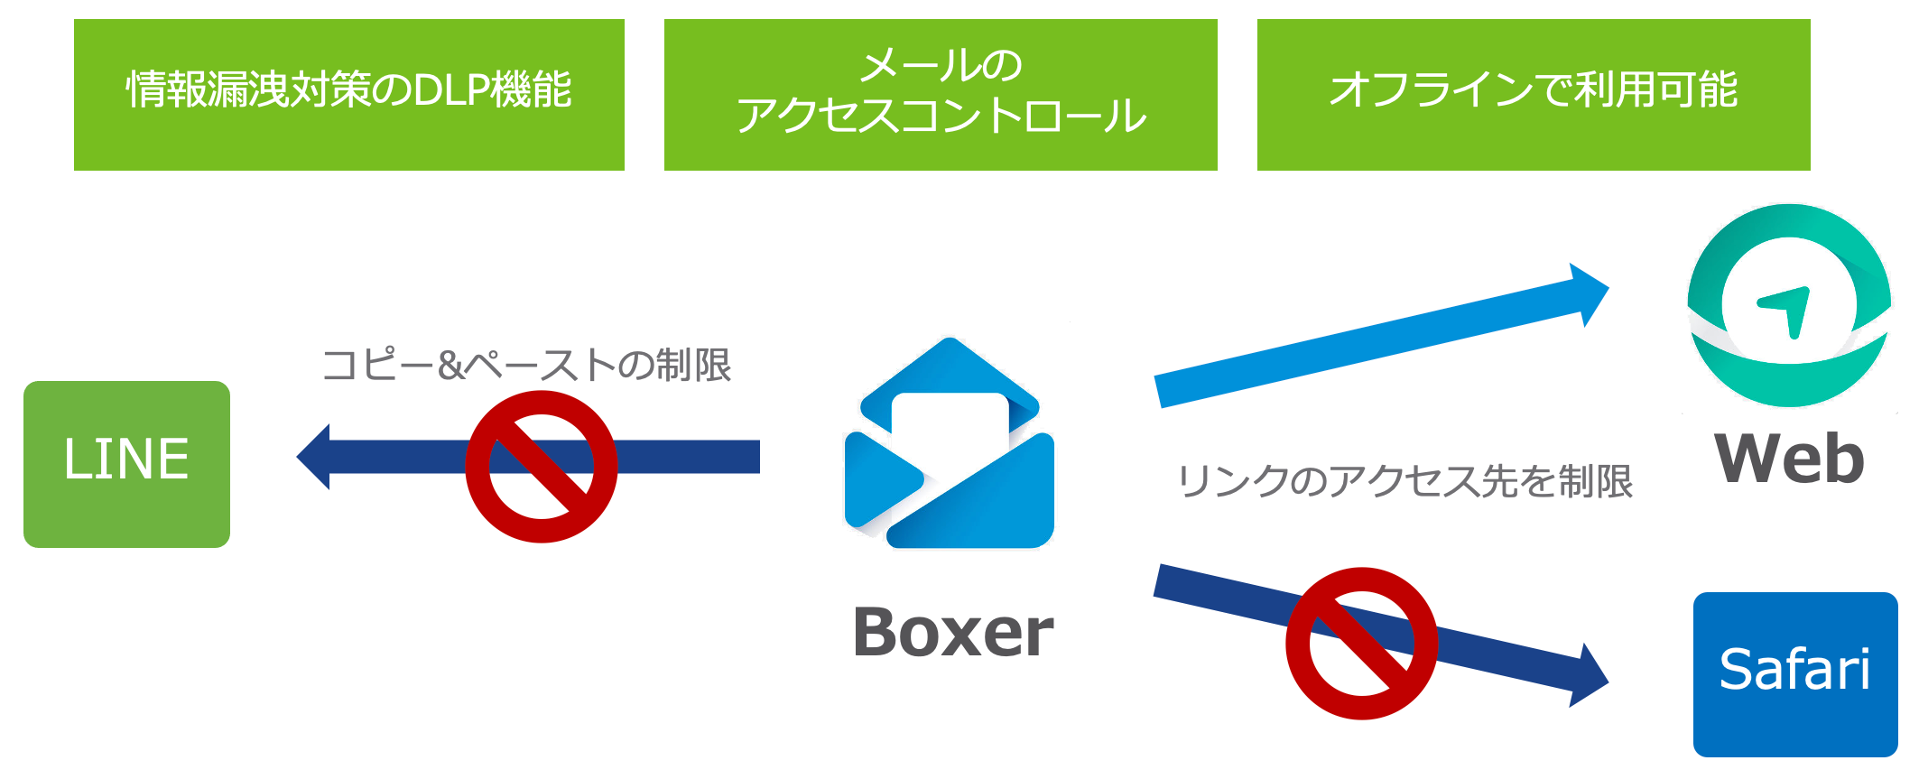 Boxer概要.png